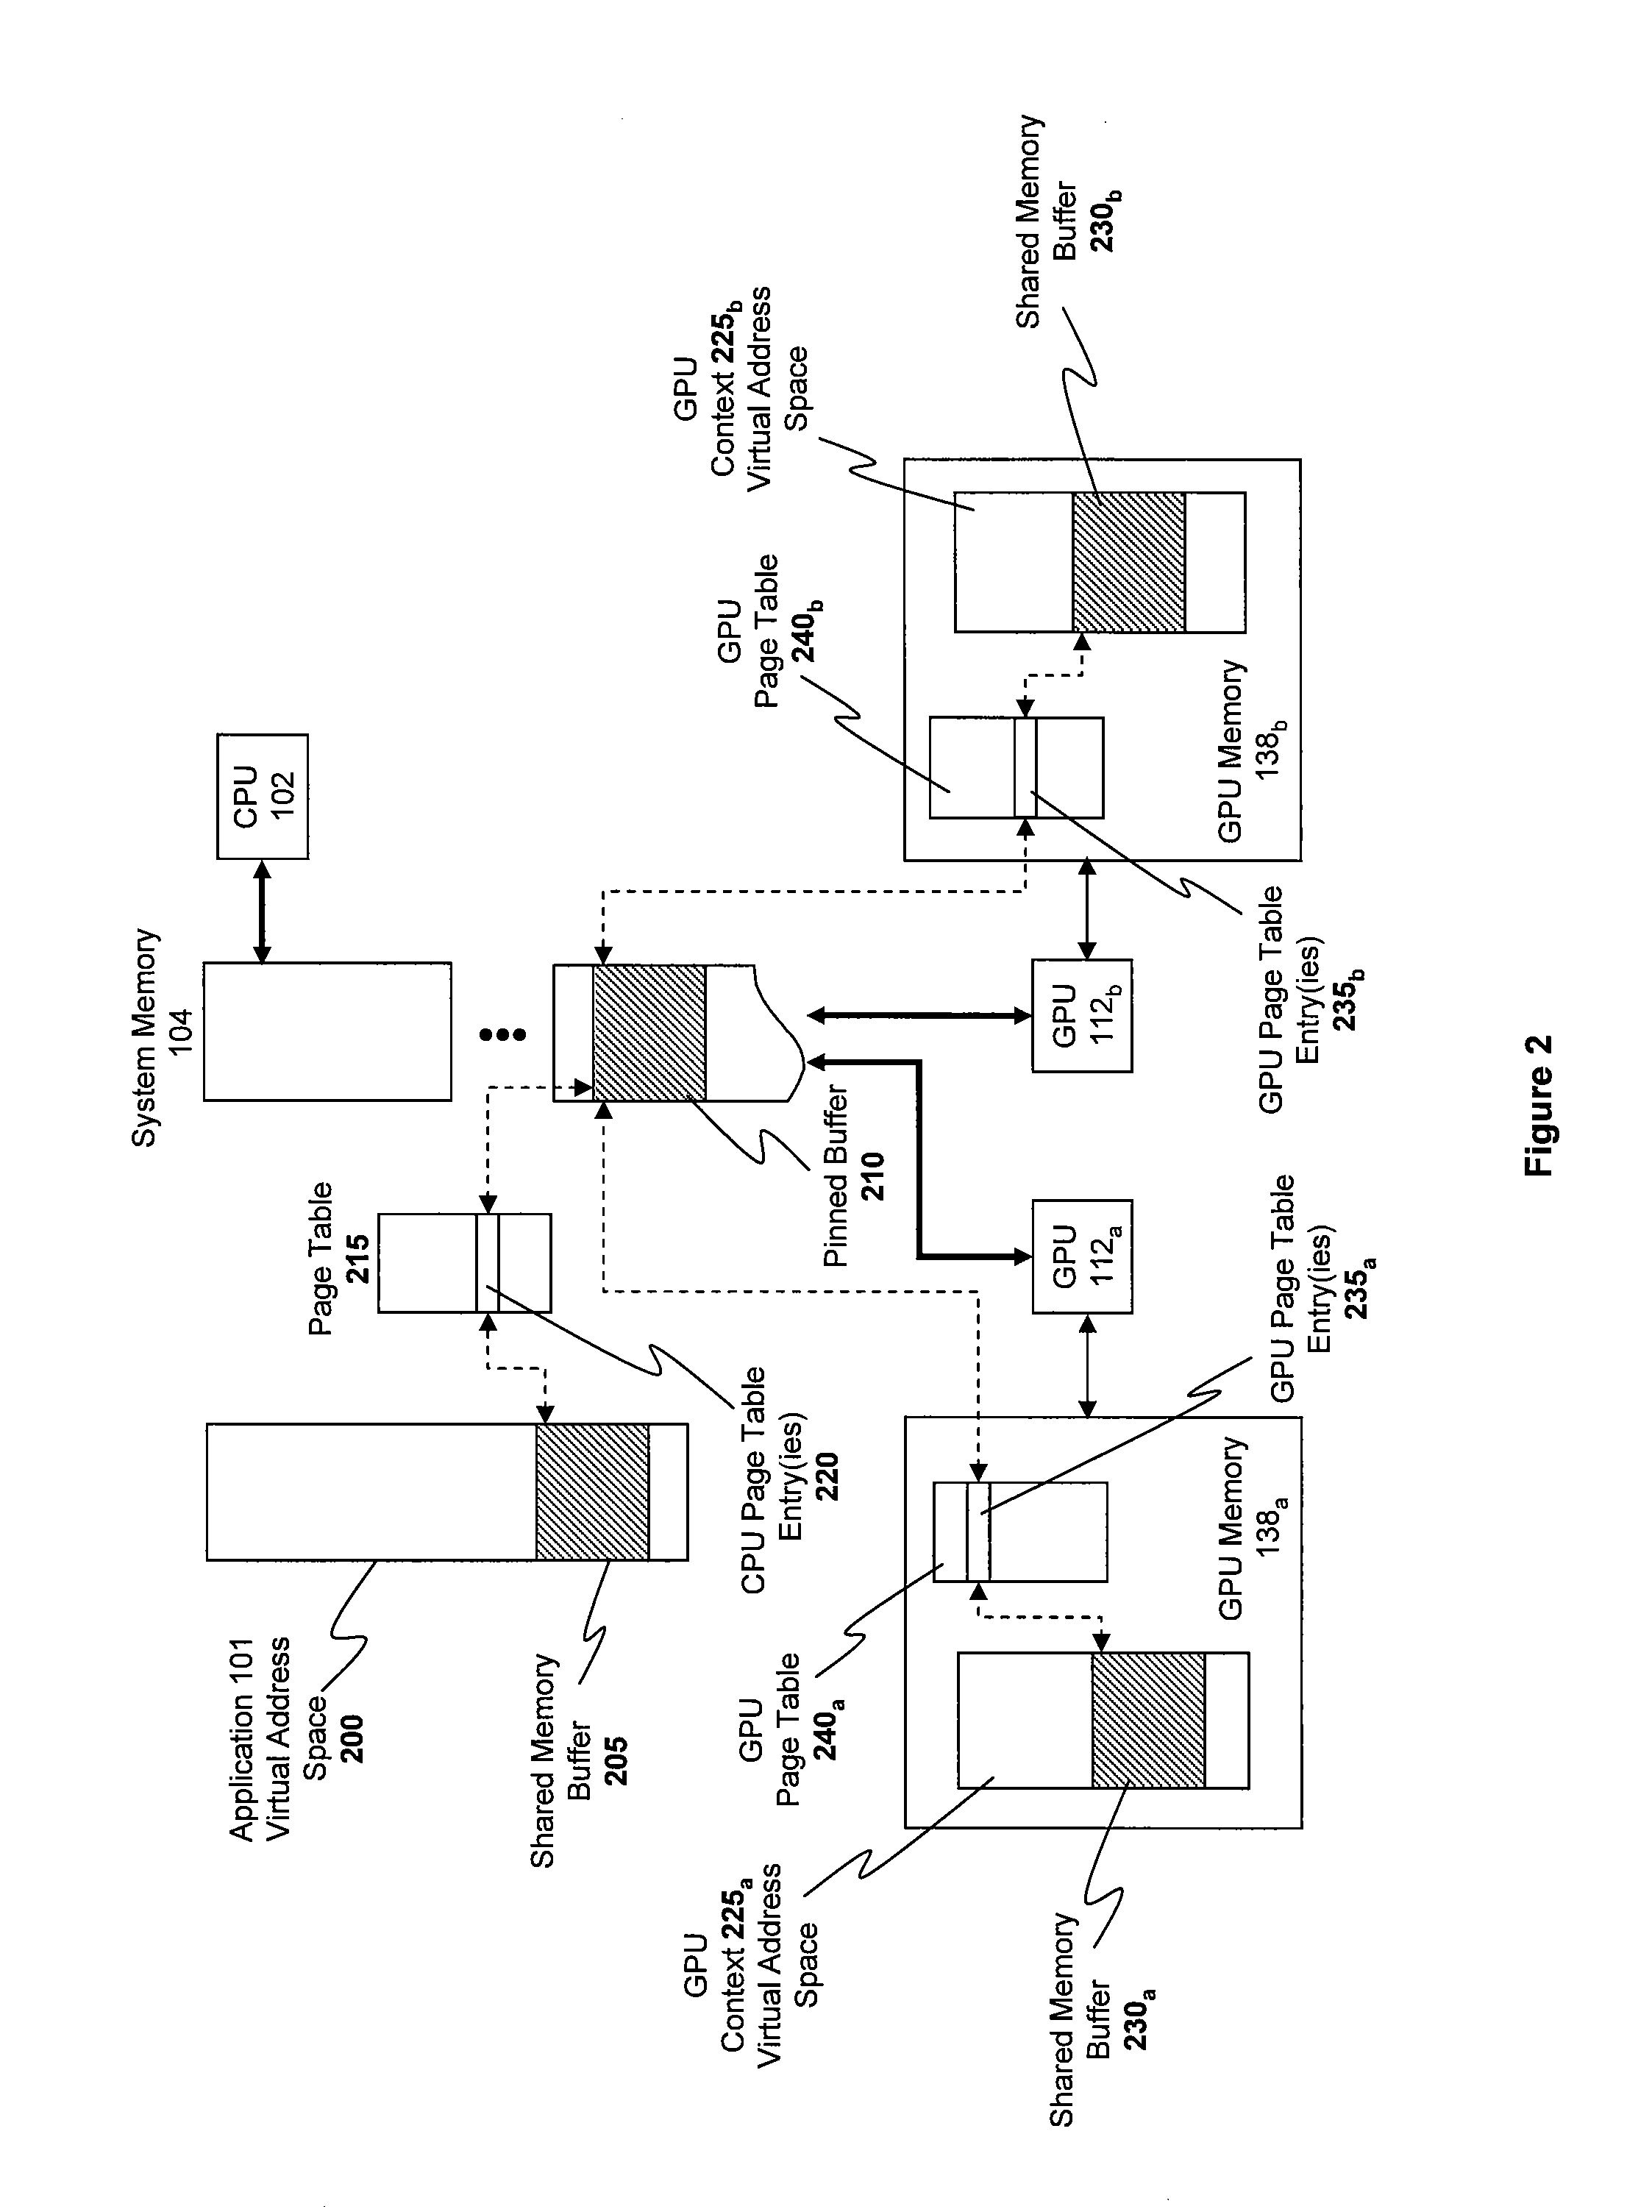 Method and system for providing shared memory access to graphics processing unit processes